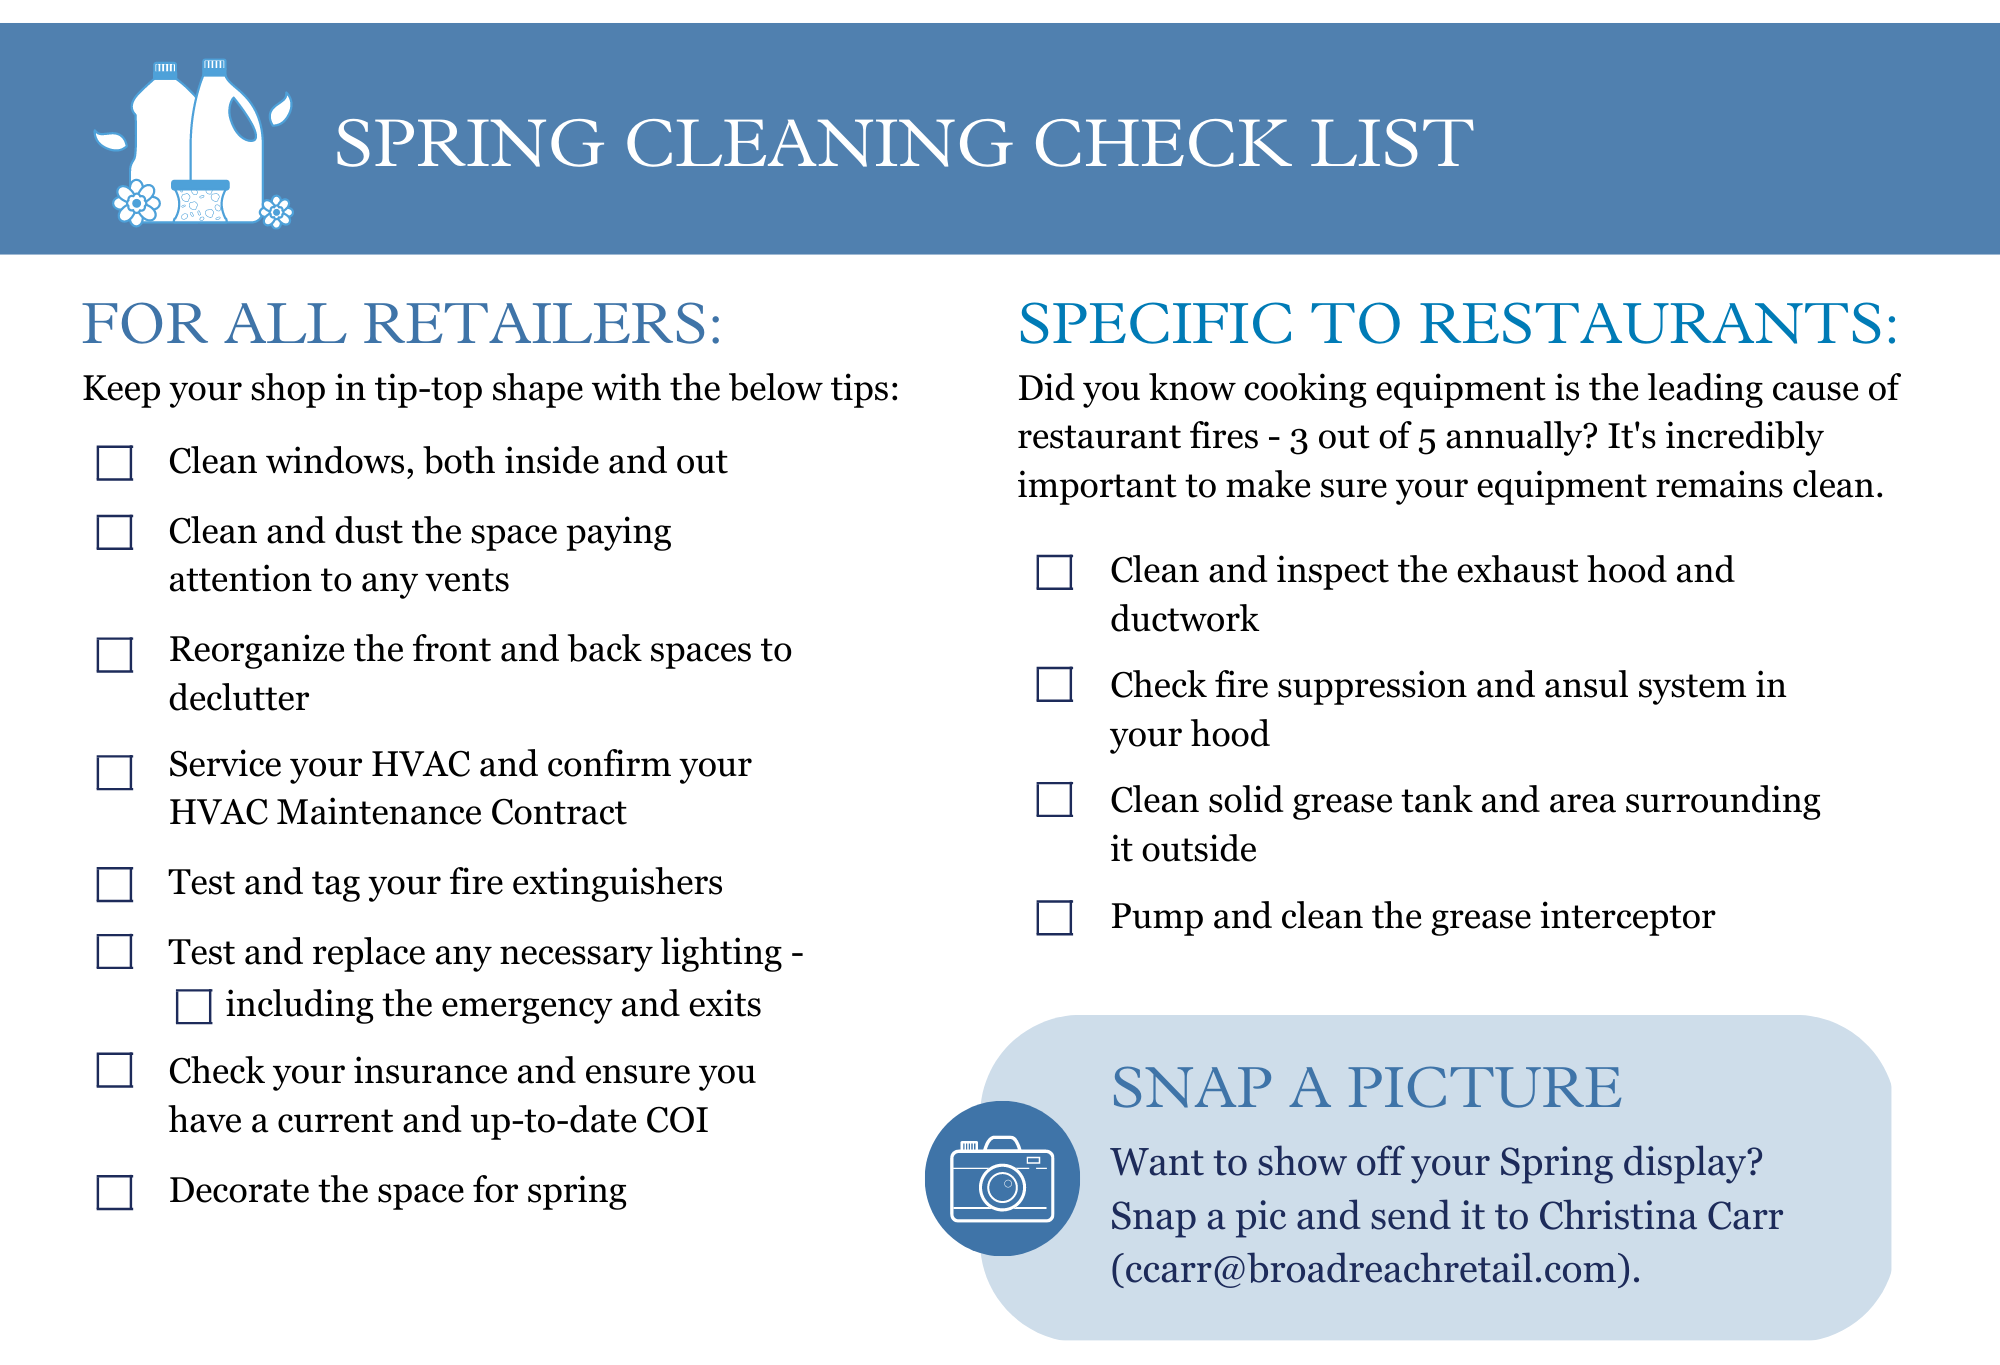 Checklist of items to help keep the store in tip top shape.